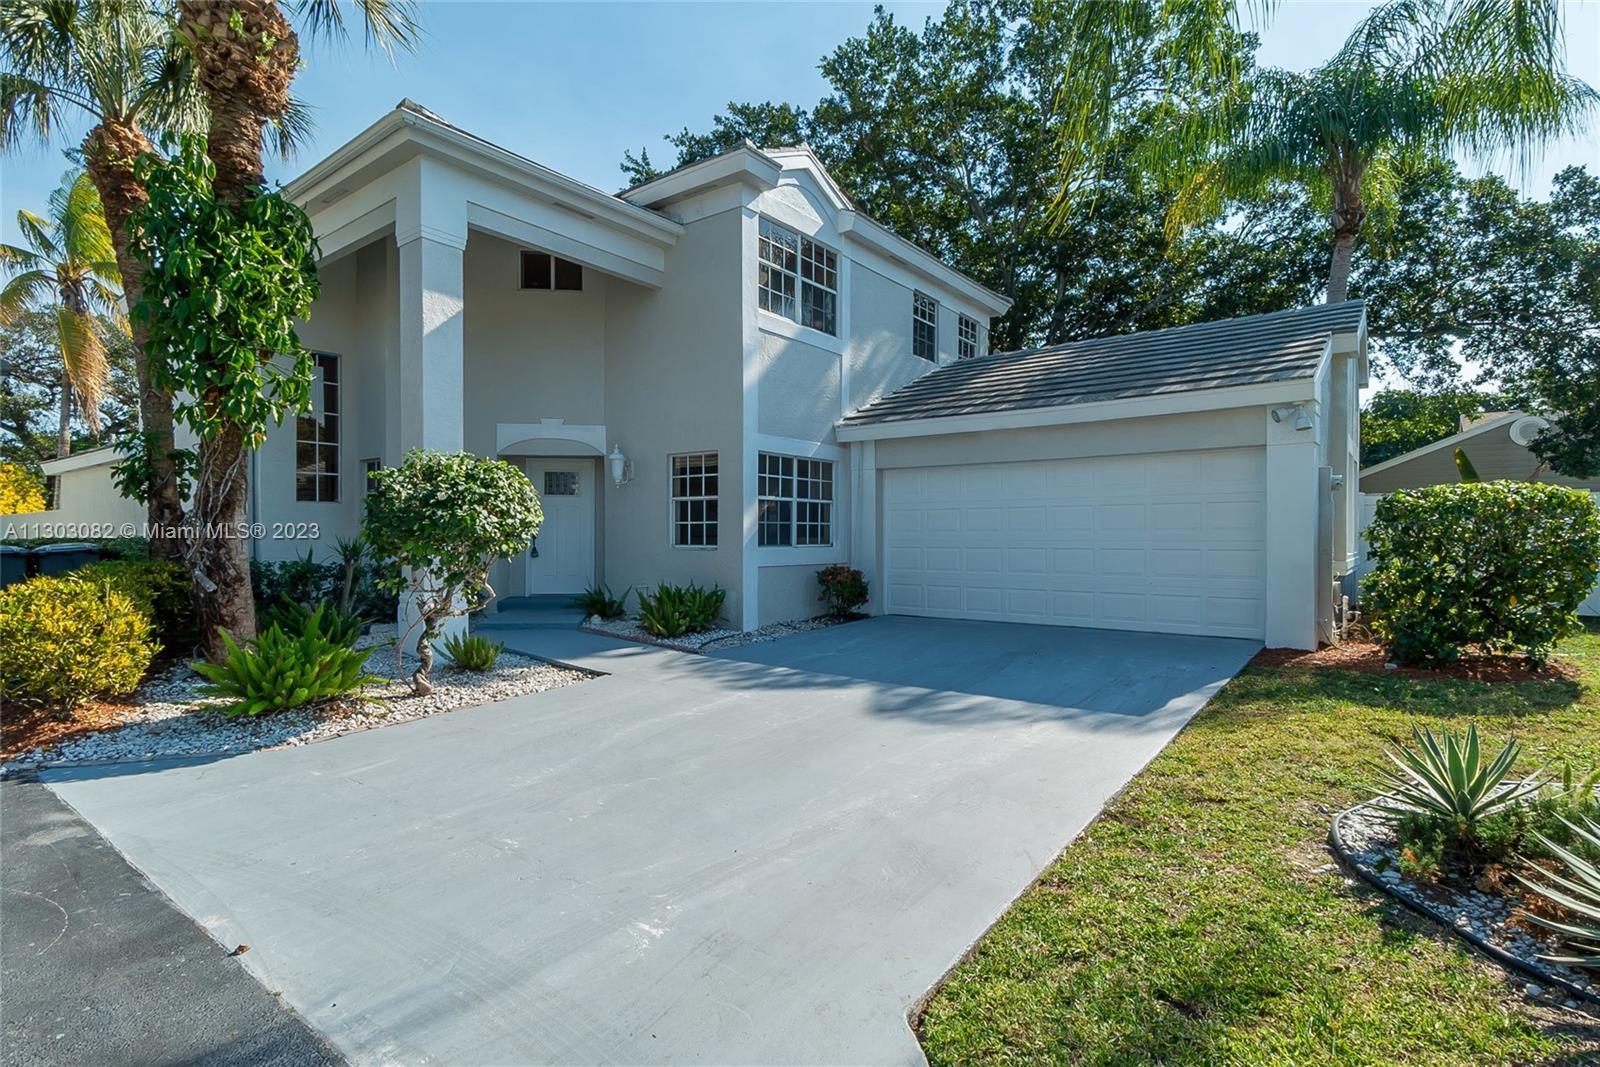 This charming residence is situated in the heart of Boca Raton and boasts five bedrooms and three fu